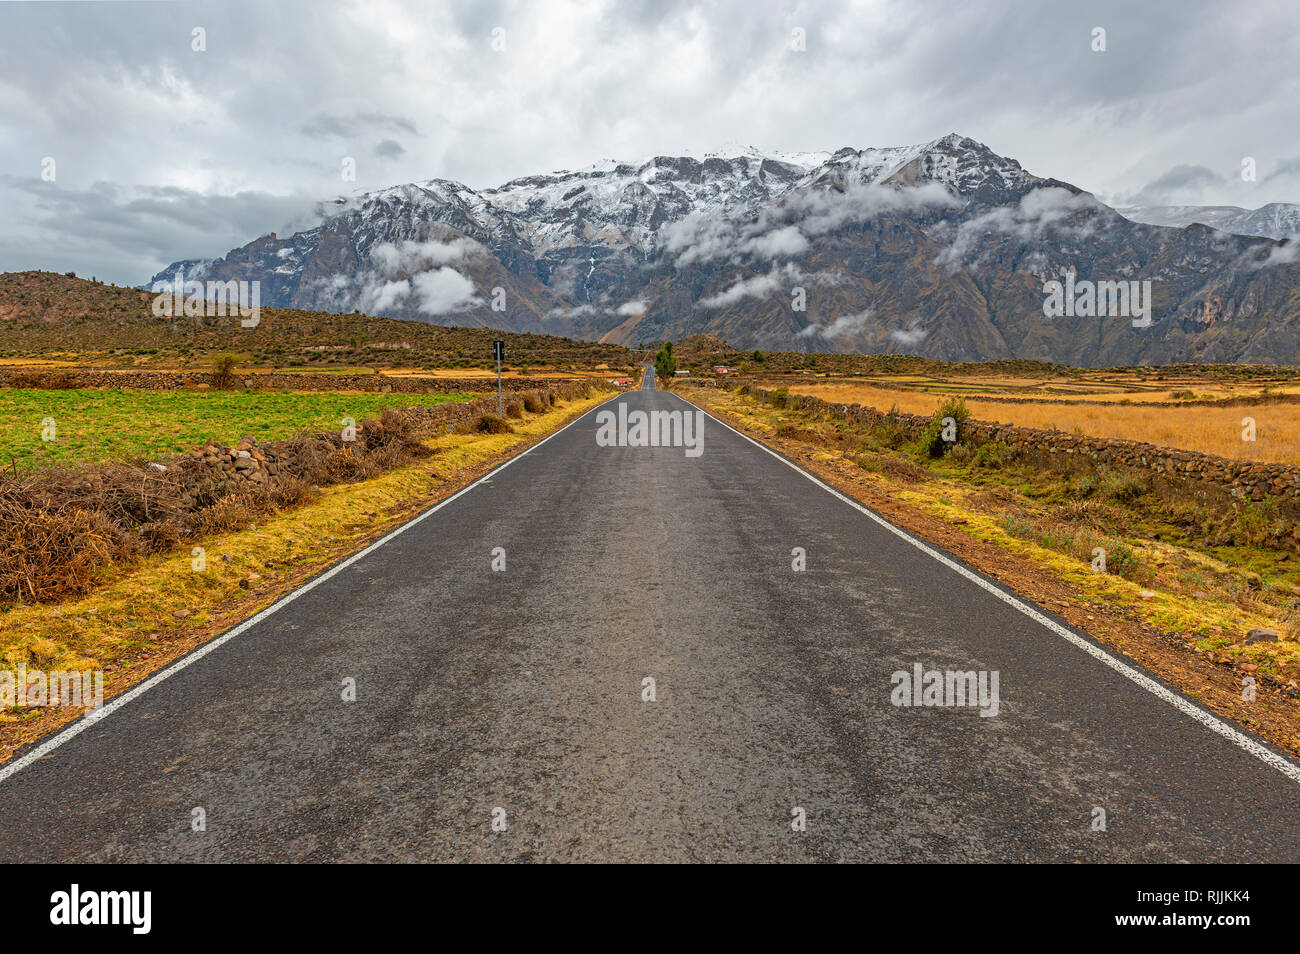 On the road landscape of a highway in the Andes mountain range of Peru in the region of Arequipa and the Colca Canyon, South America. Stock Photo